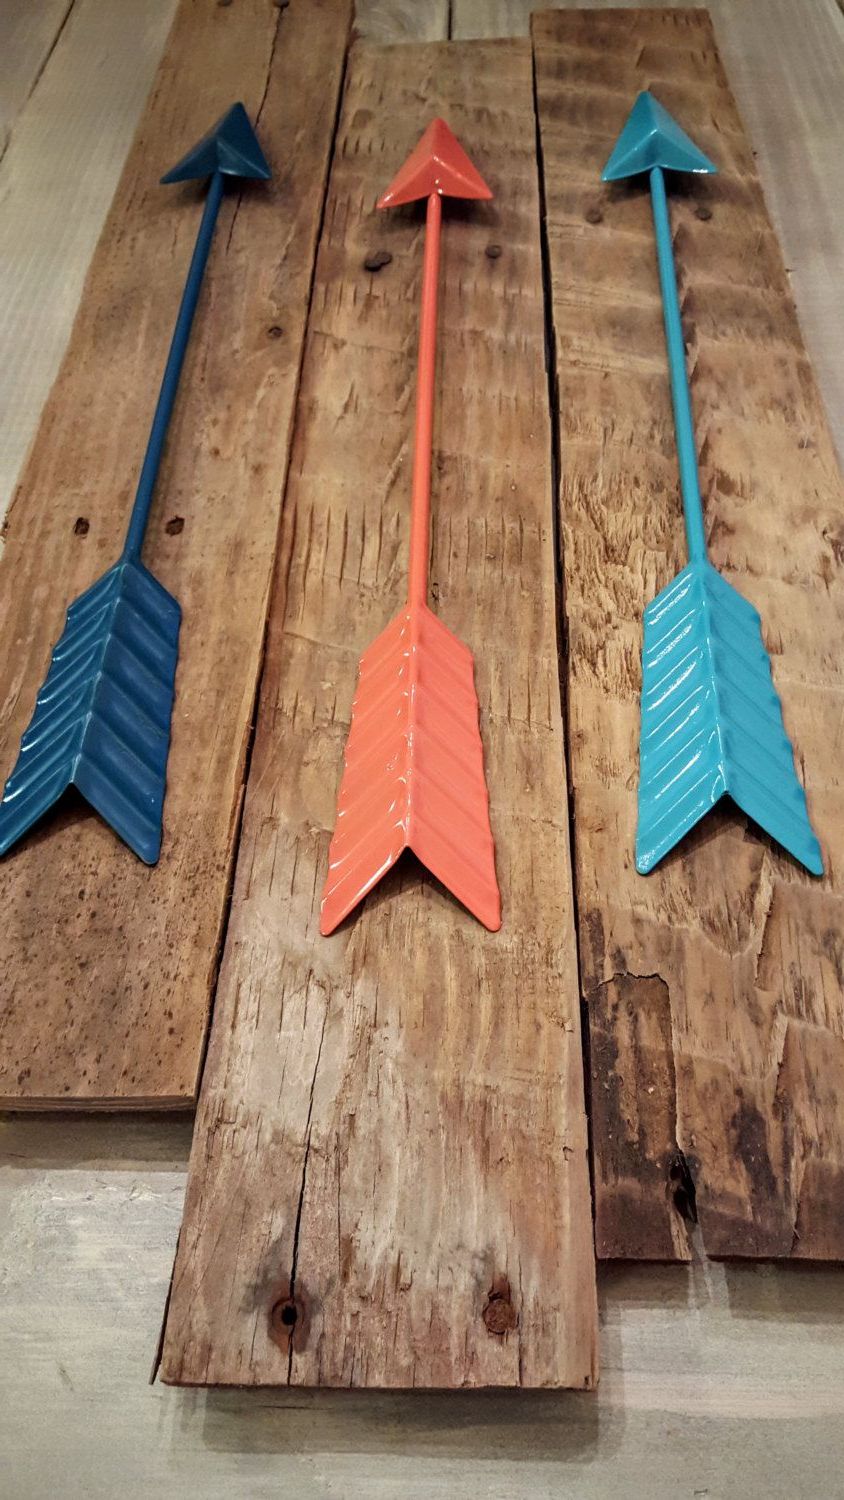 Most Recent Brown Metal Tribal Arrow Wall Decor Within Metal Arrow Wall Decor / 3 Metal Arrows / Reclaimed Wood Wall Art (View 15 of 20)